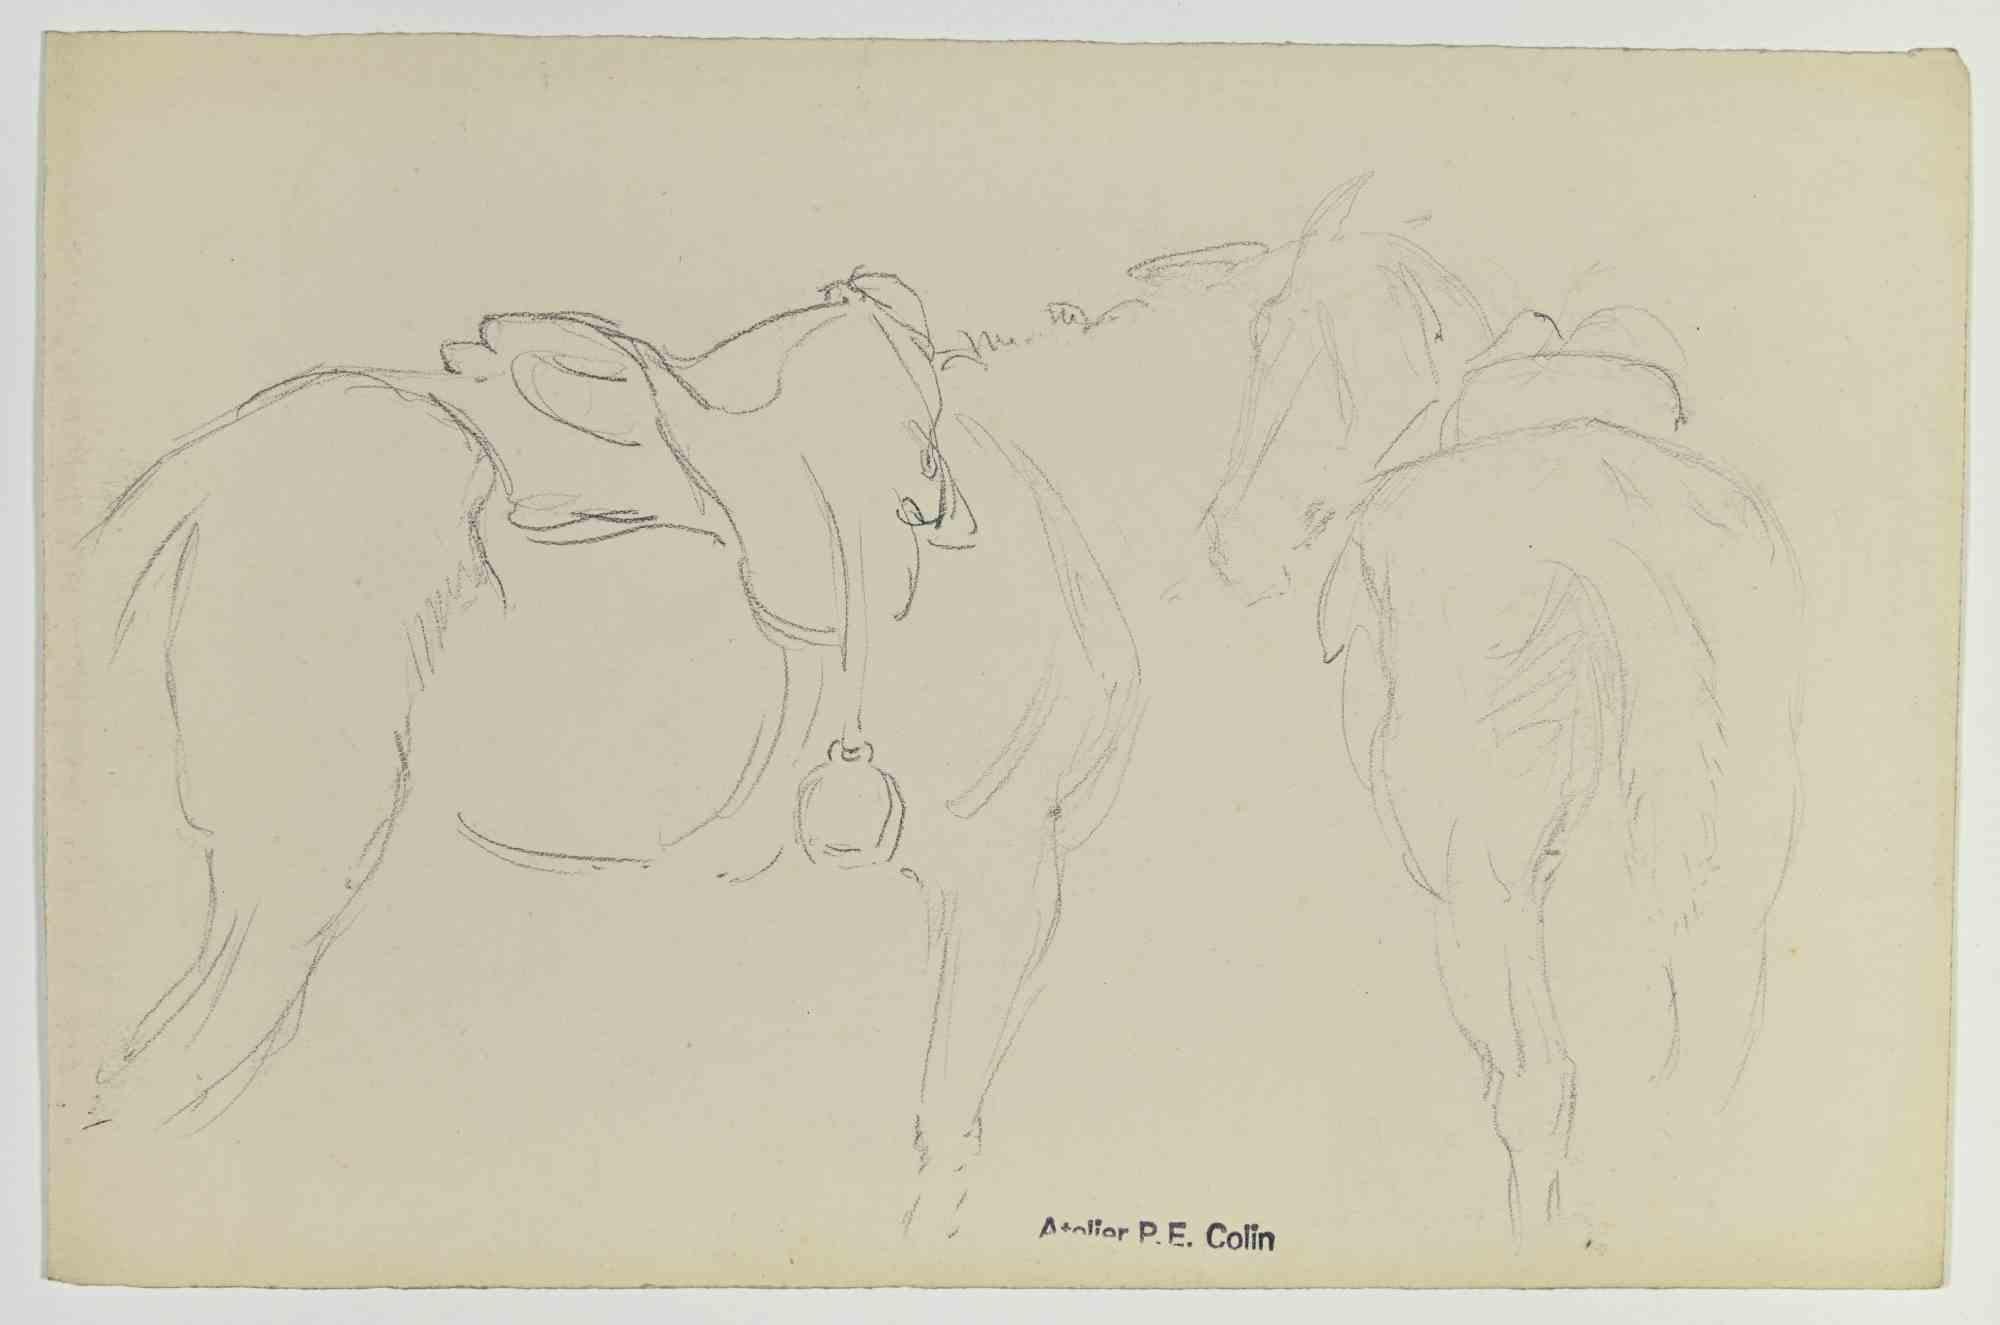 Horses is a drawing realized by Paul Emile Colin in the Early 20th Century.

Carbon Pencil on ivory-colored paper

Stamped on the lower.

Good conditions with slight foxing.

The artwork is realized through deft expressive strokes.